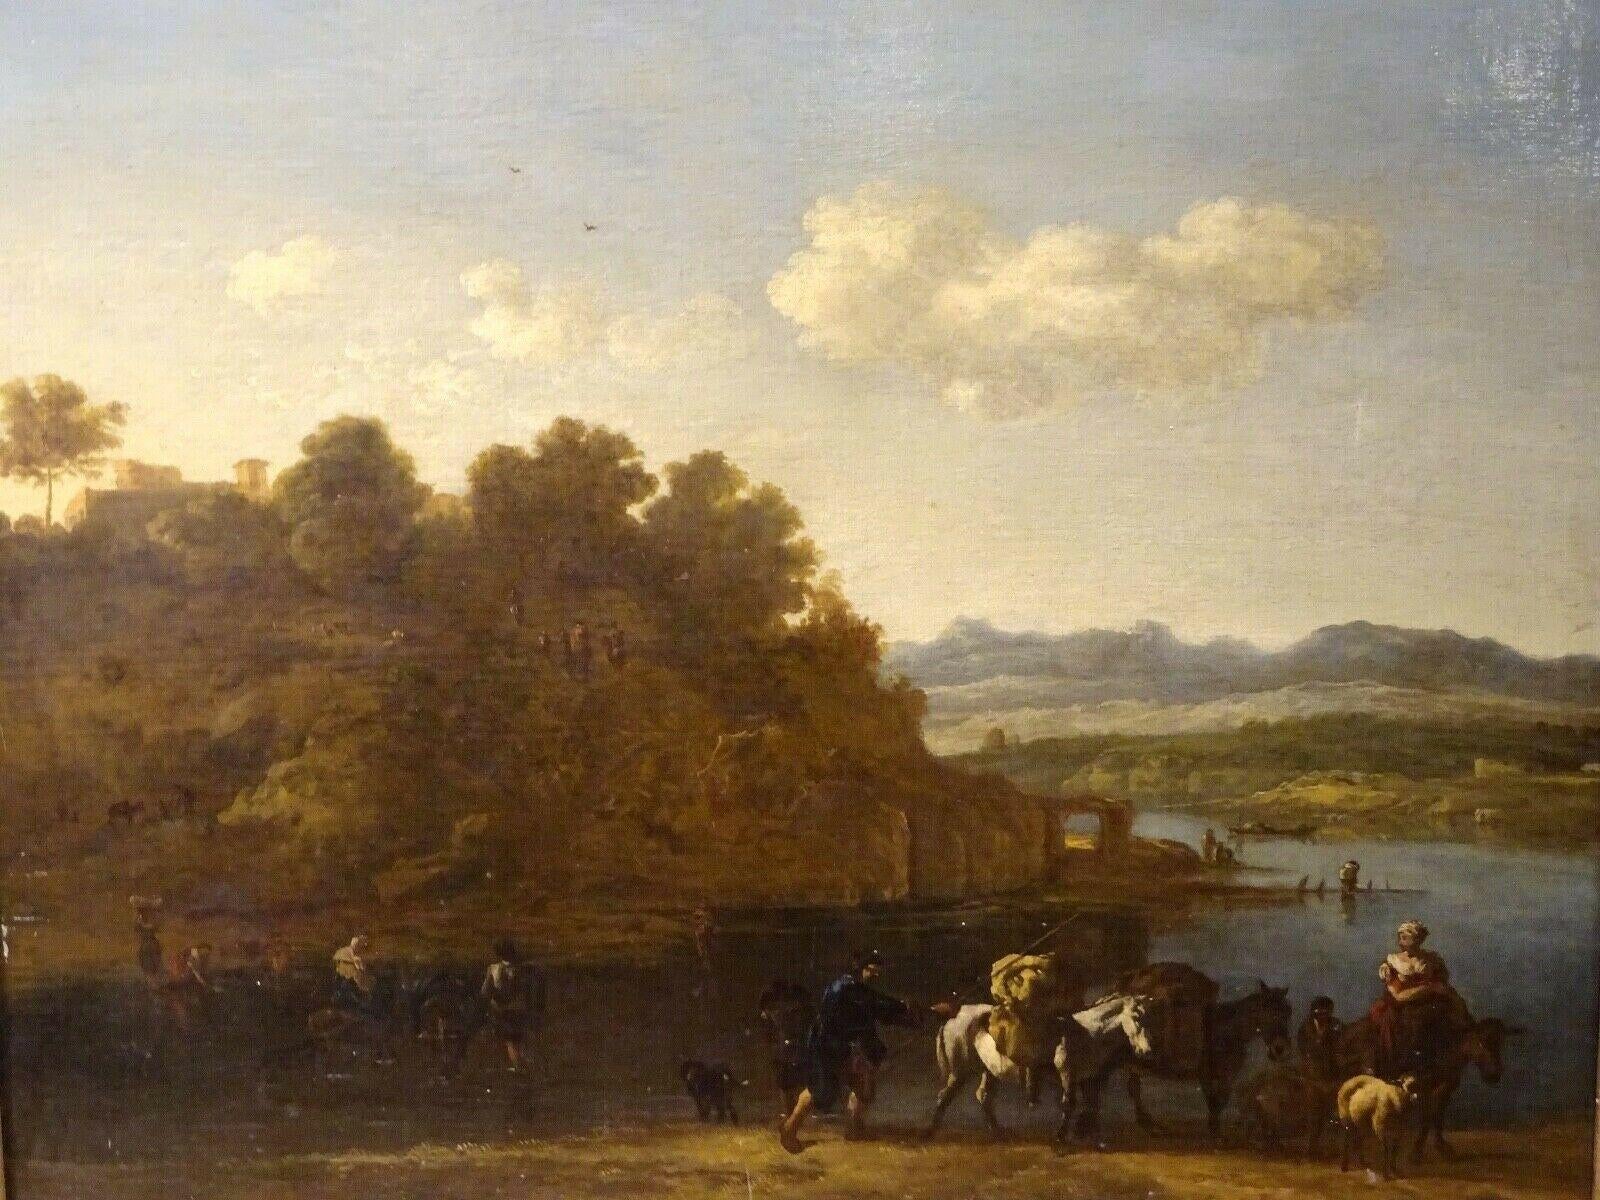 Figures & Cattle In A River Landscape, 17th Century - Painting by Johann Melchior Roos